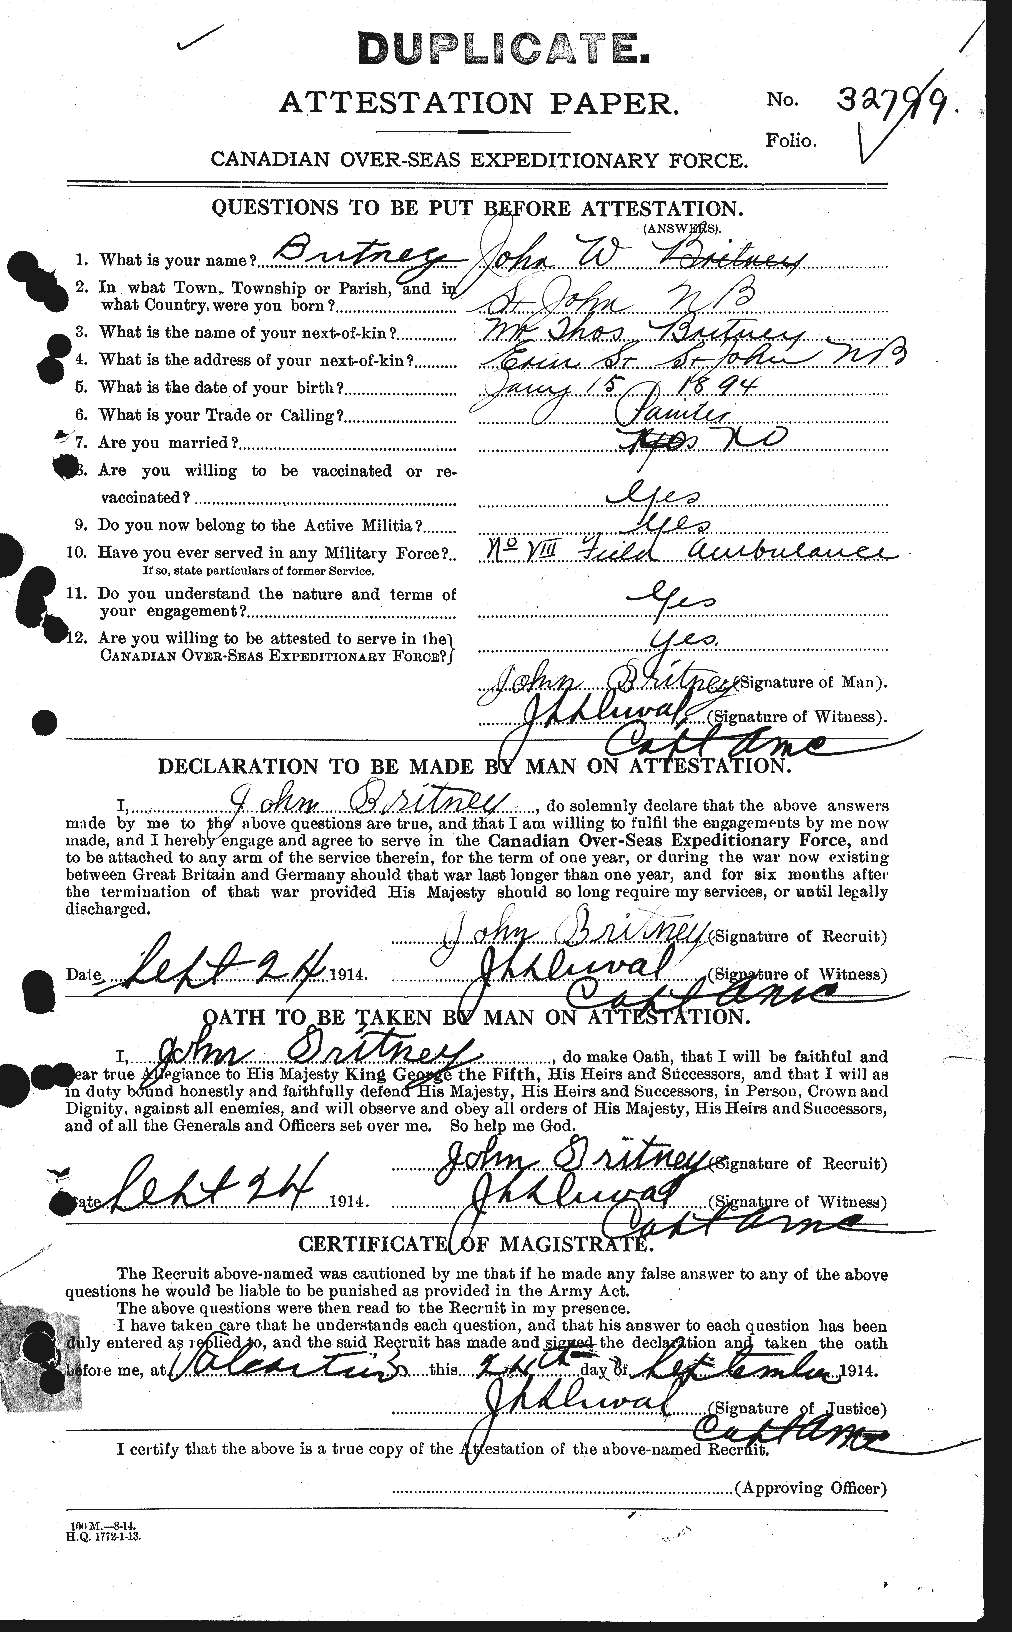 Personnel Records of the First World War - CEF 261816a